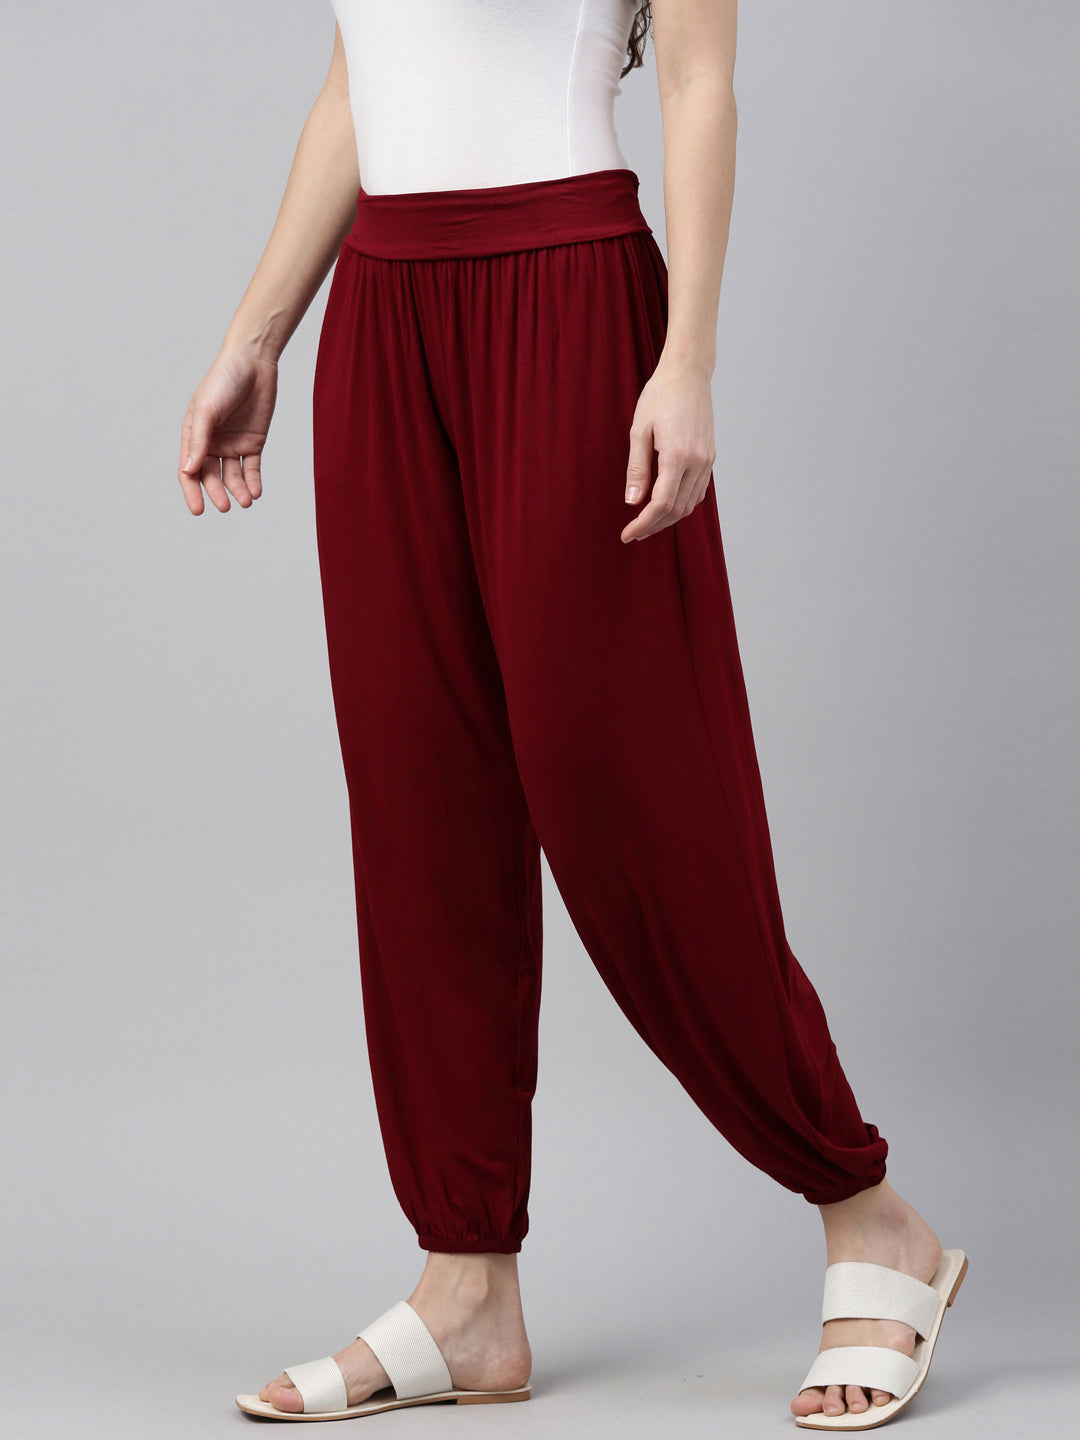 Cotton Brown 2 In 1 Harem Pants